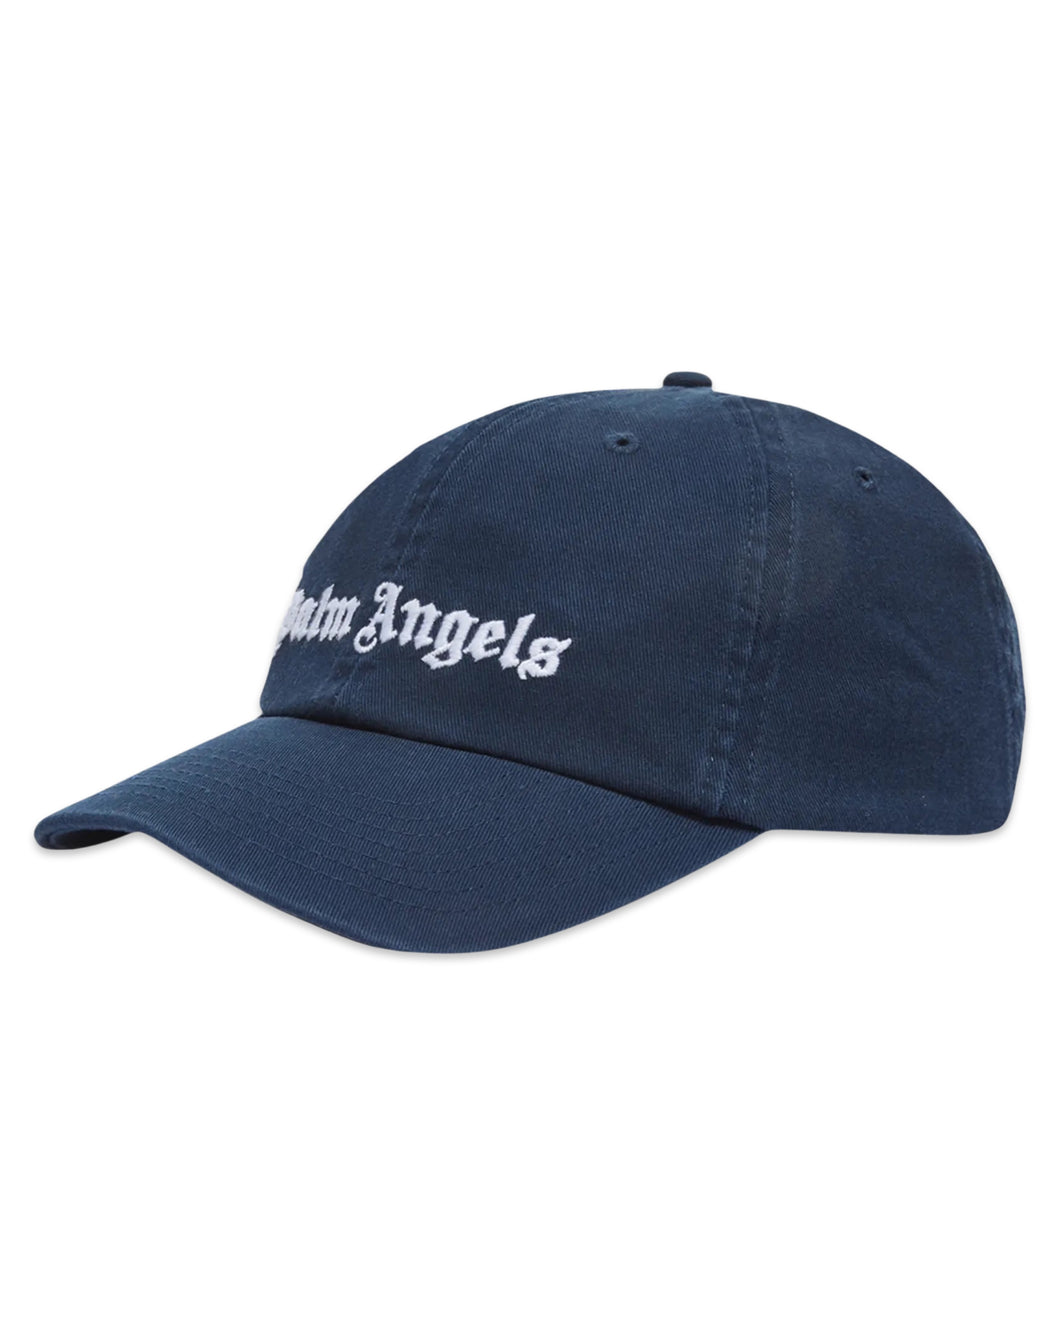 Palm Angels Logo Embroidered Baseball Cap in Navy